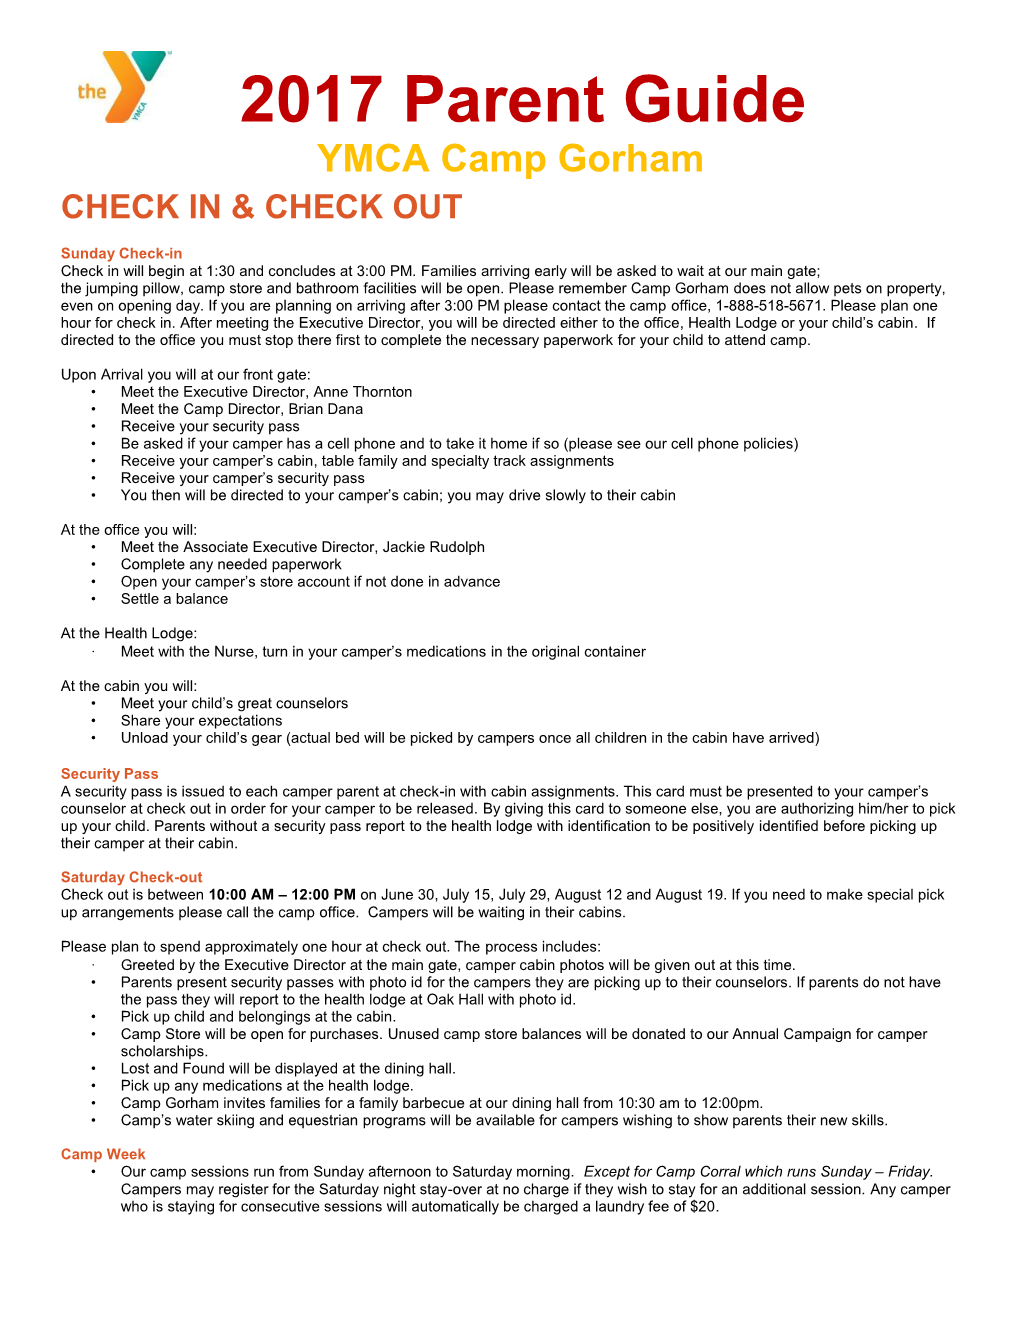 2017 Parent Guide YMCA Camp Gorham CHECK in & CHECK OUT